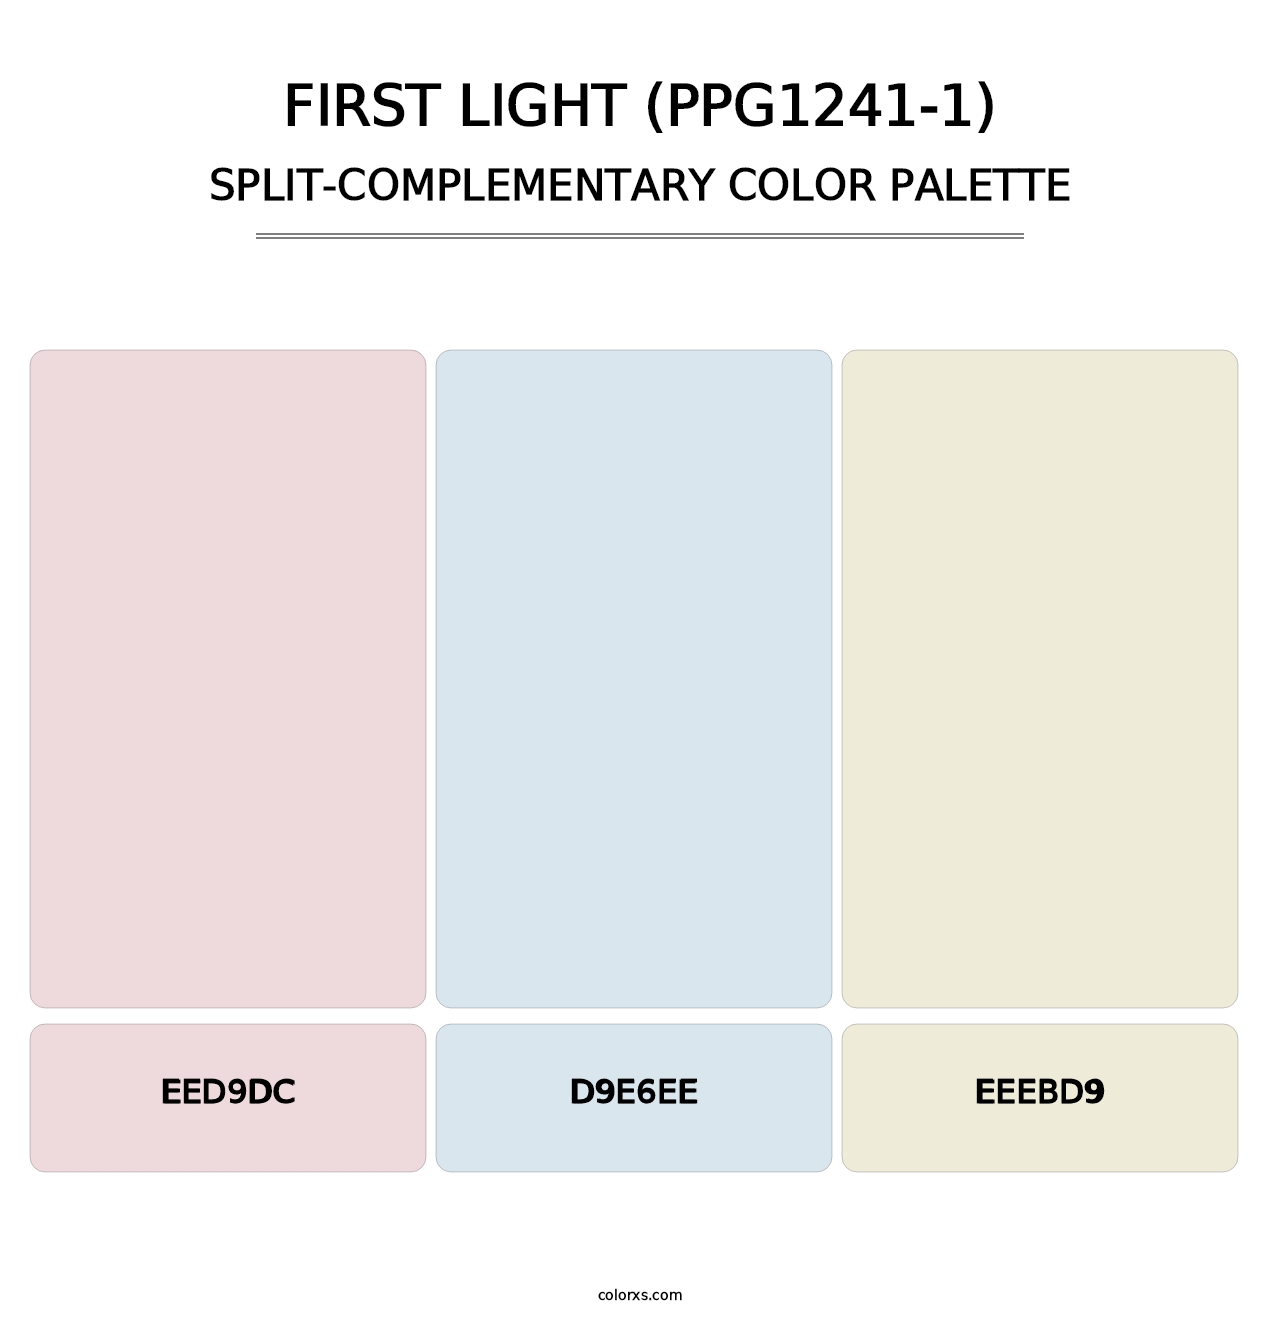 First Light (PPG1241-1) - Split-Complementary Color Palette